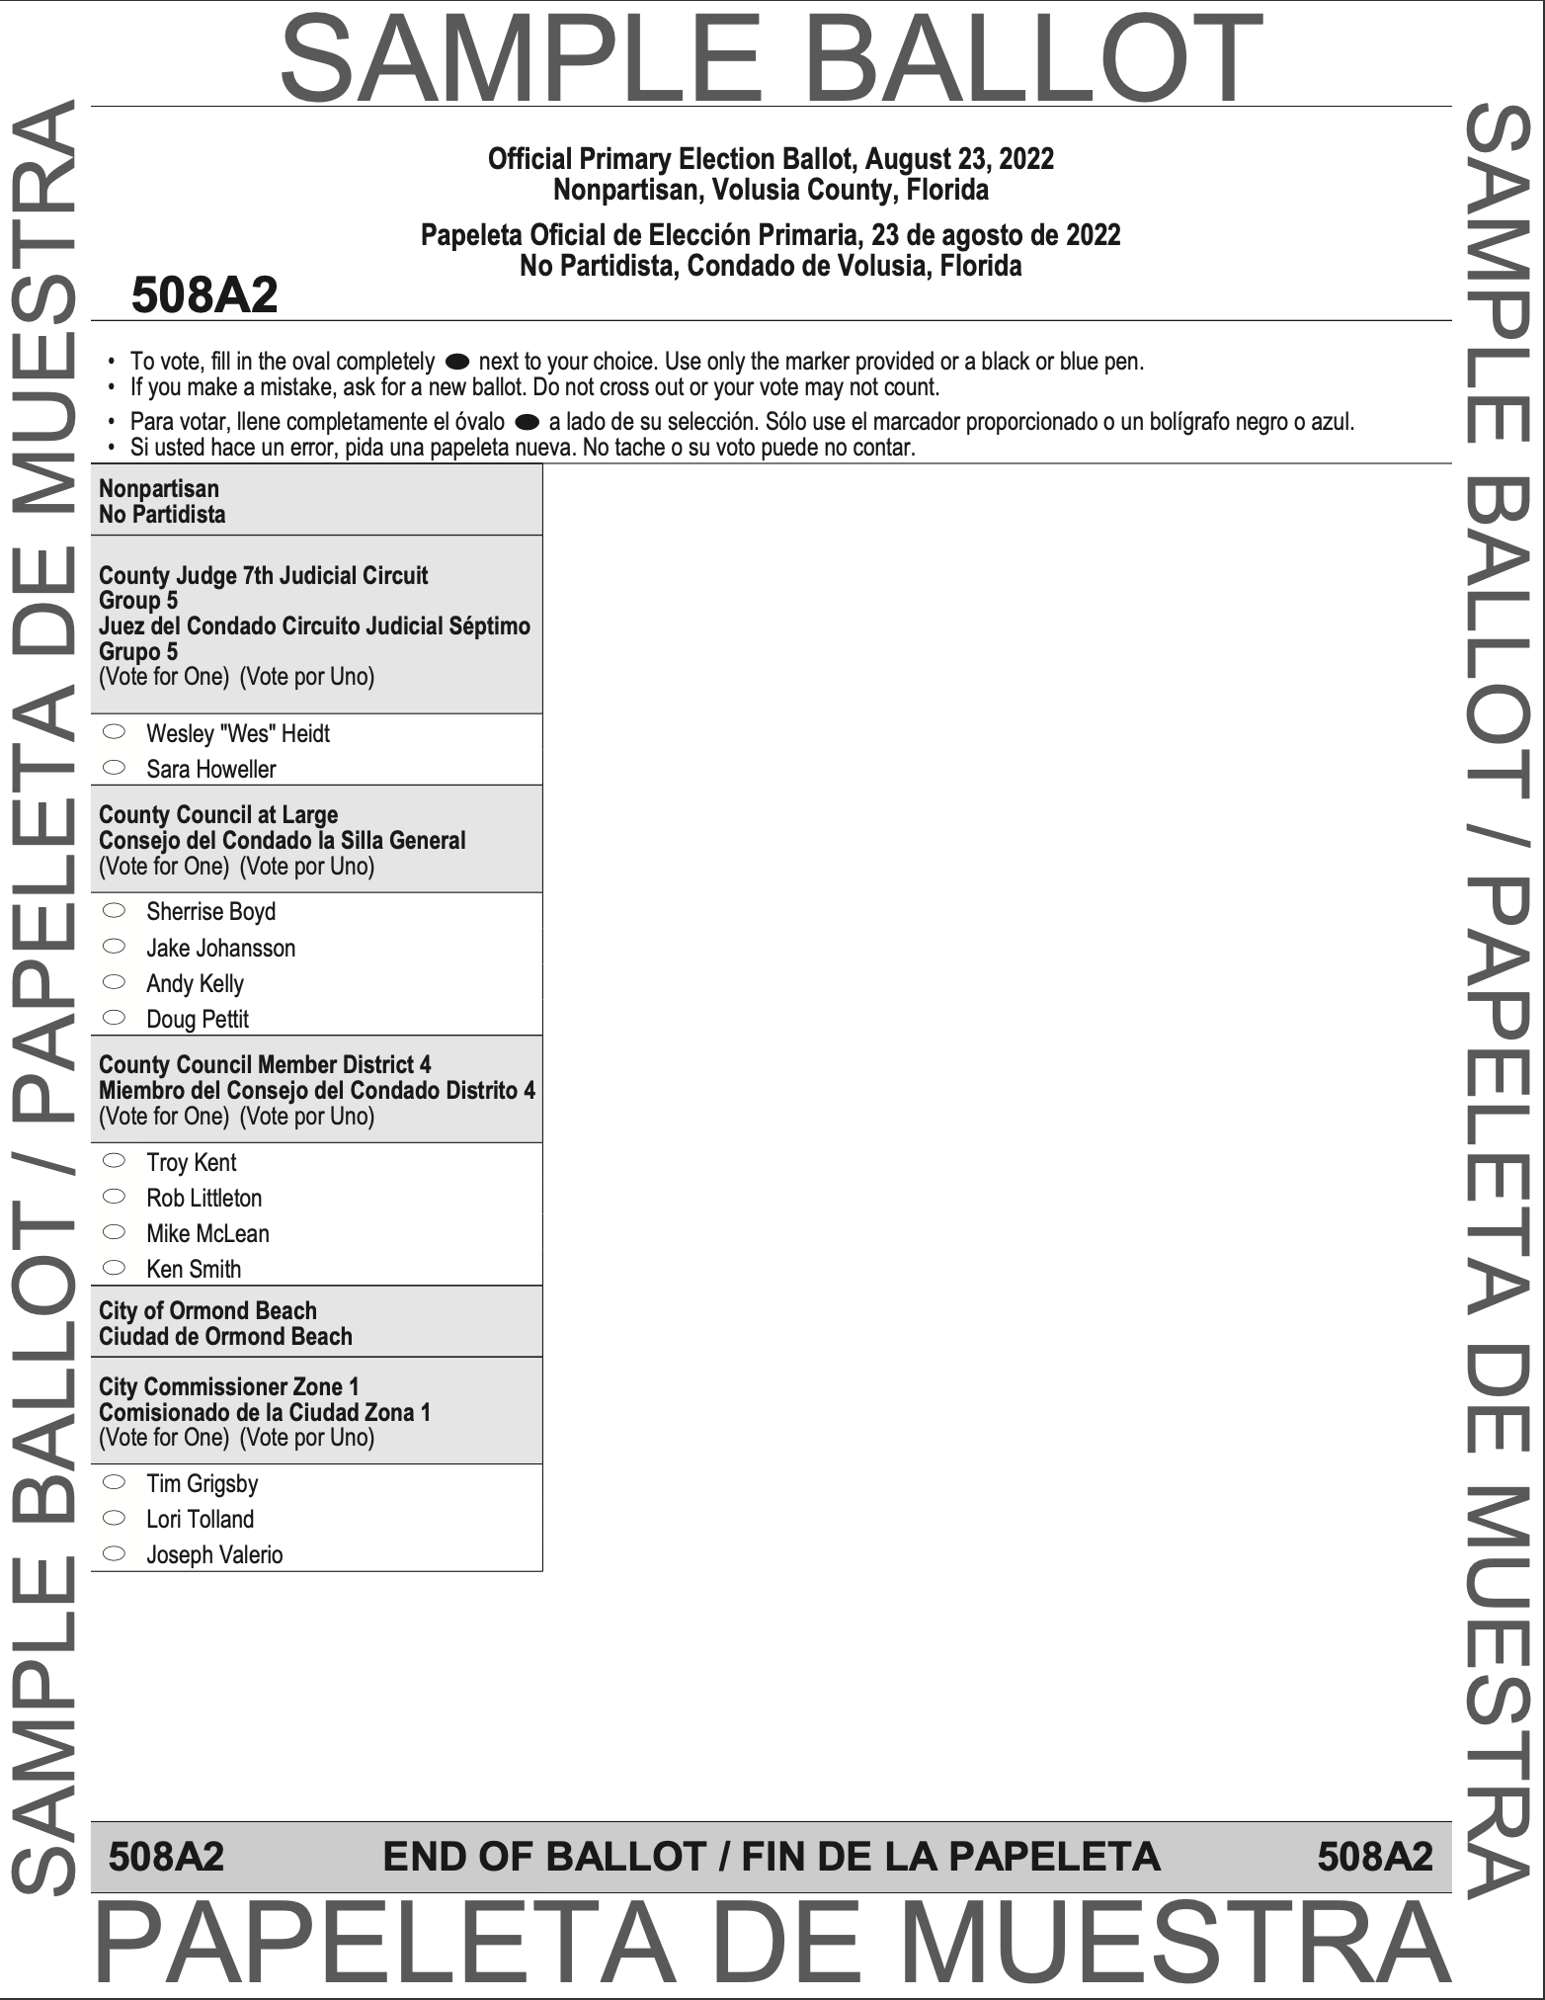 A sample ballot for a Zone 1 resident who is also an NPA voter.